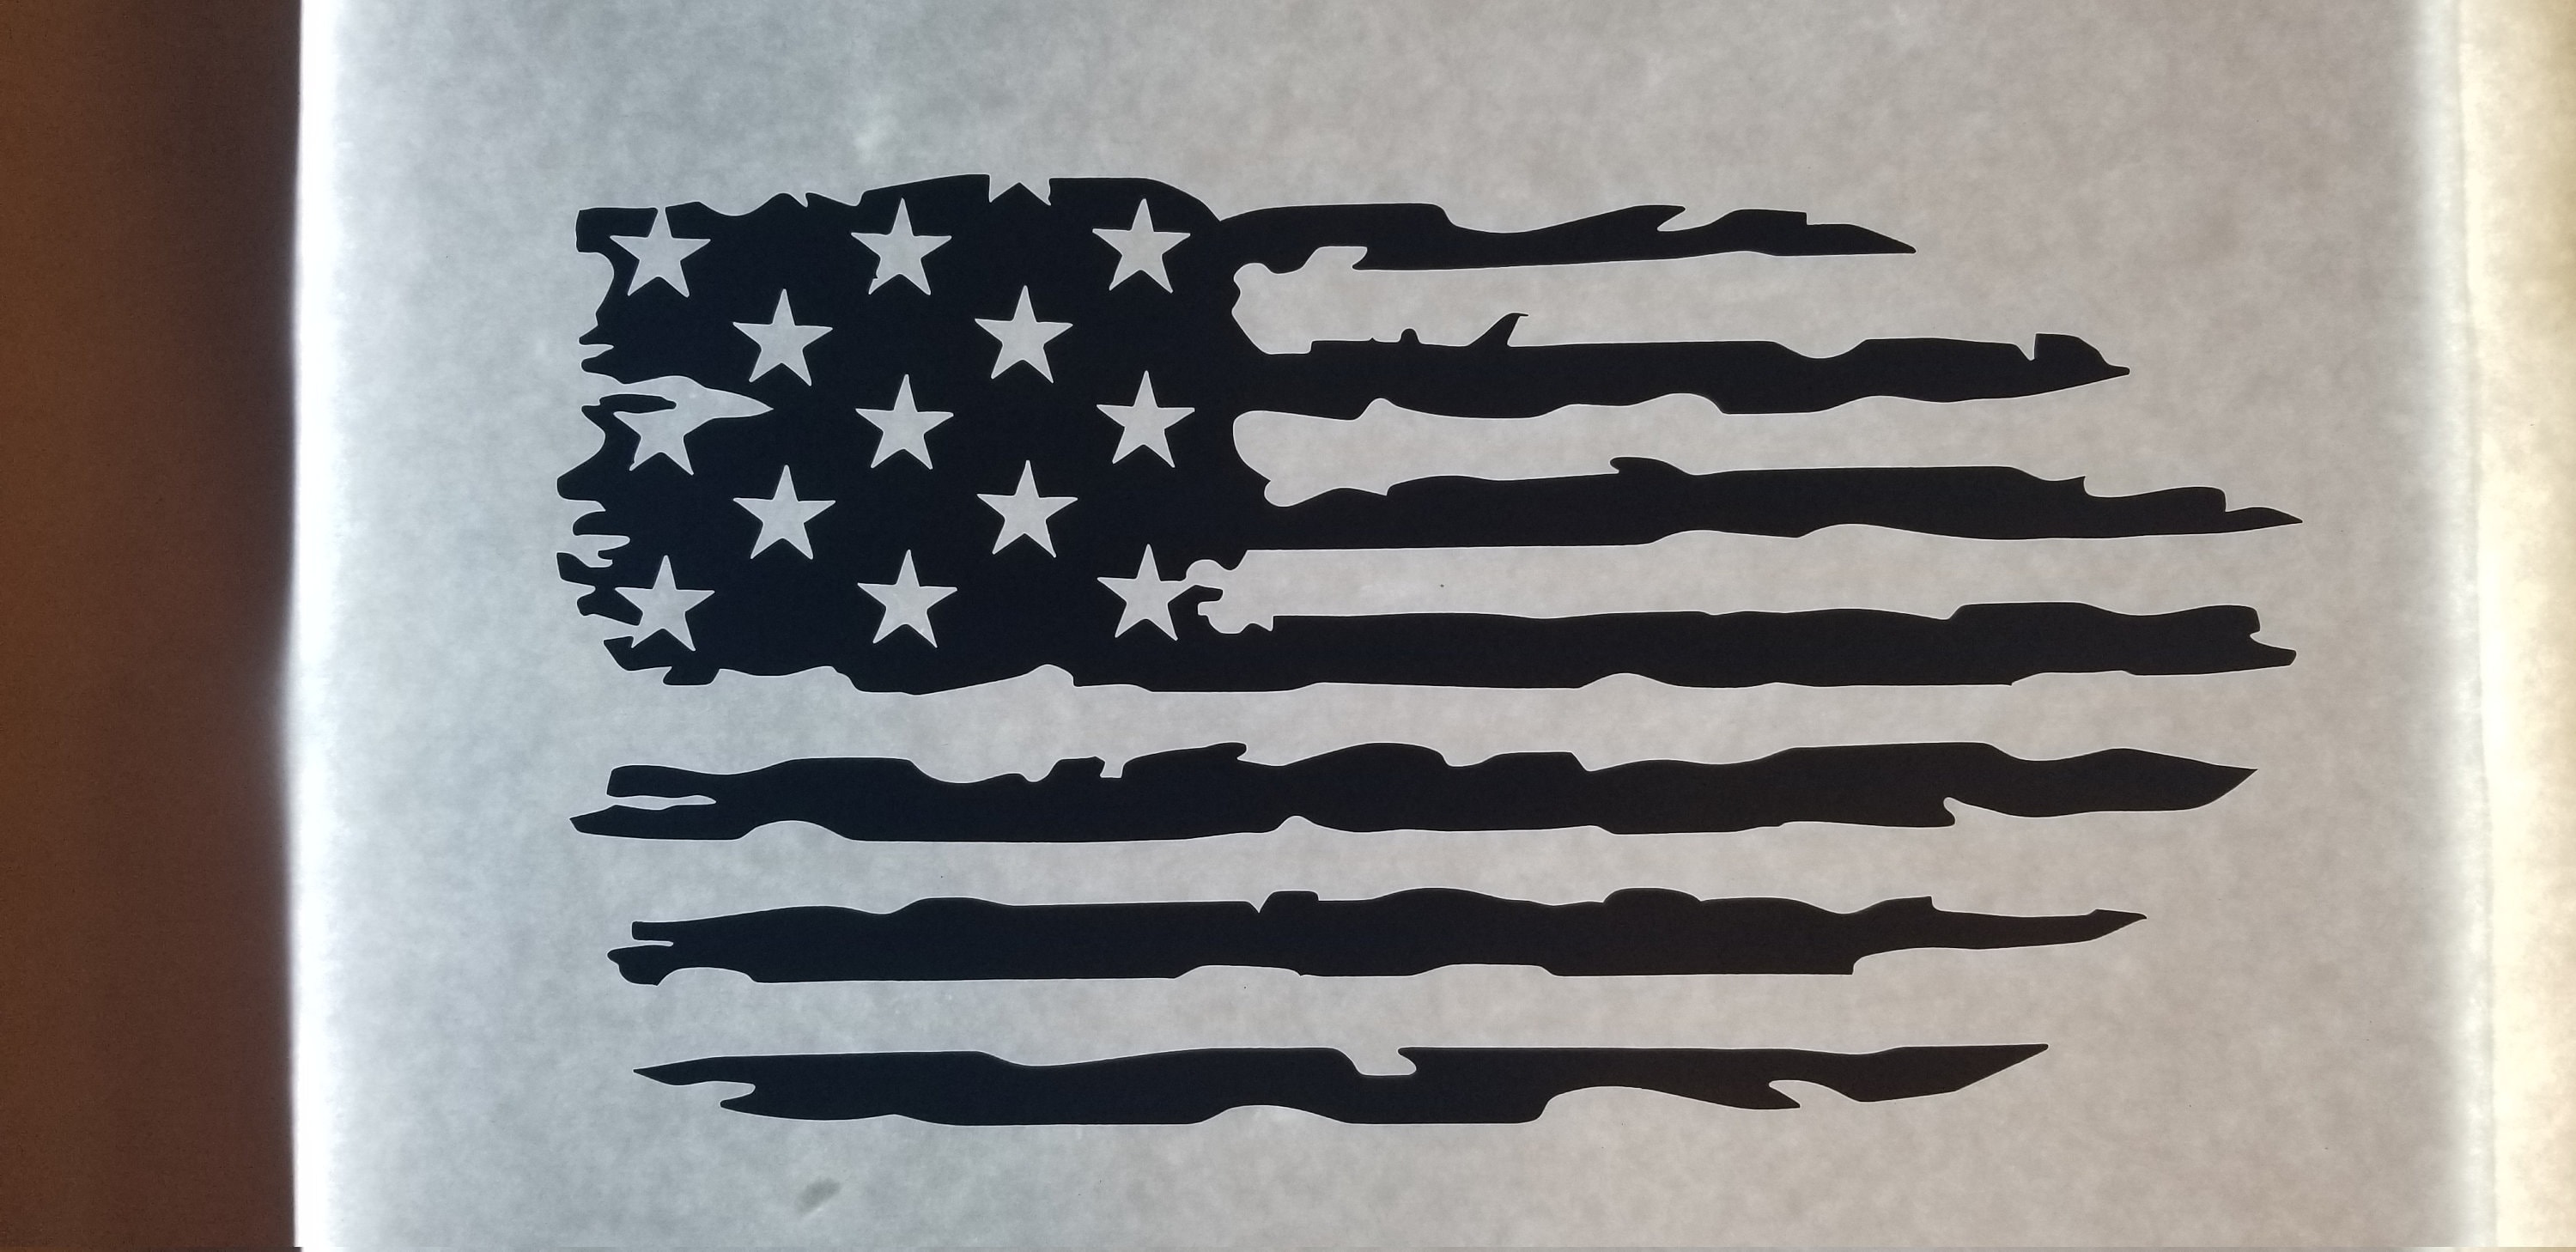 Download Rugged American Flag Etsy